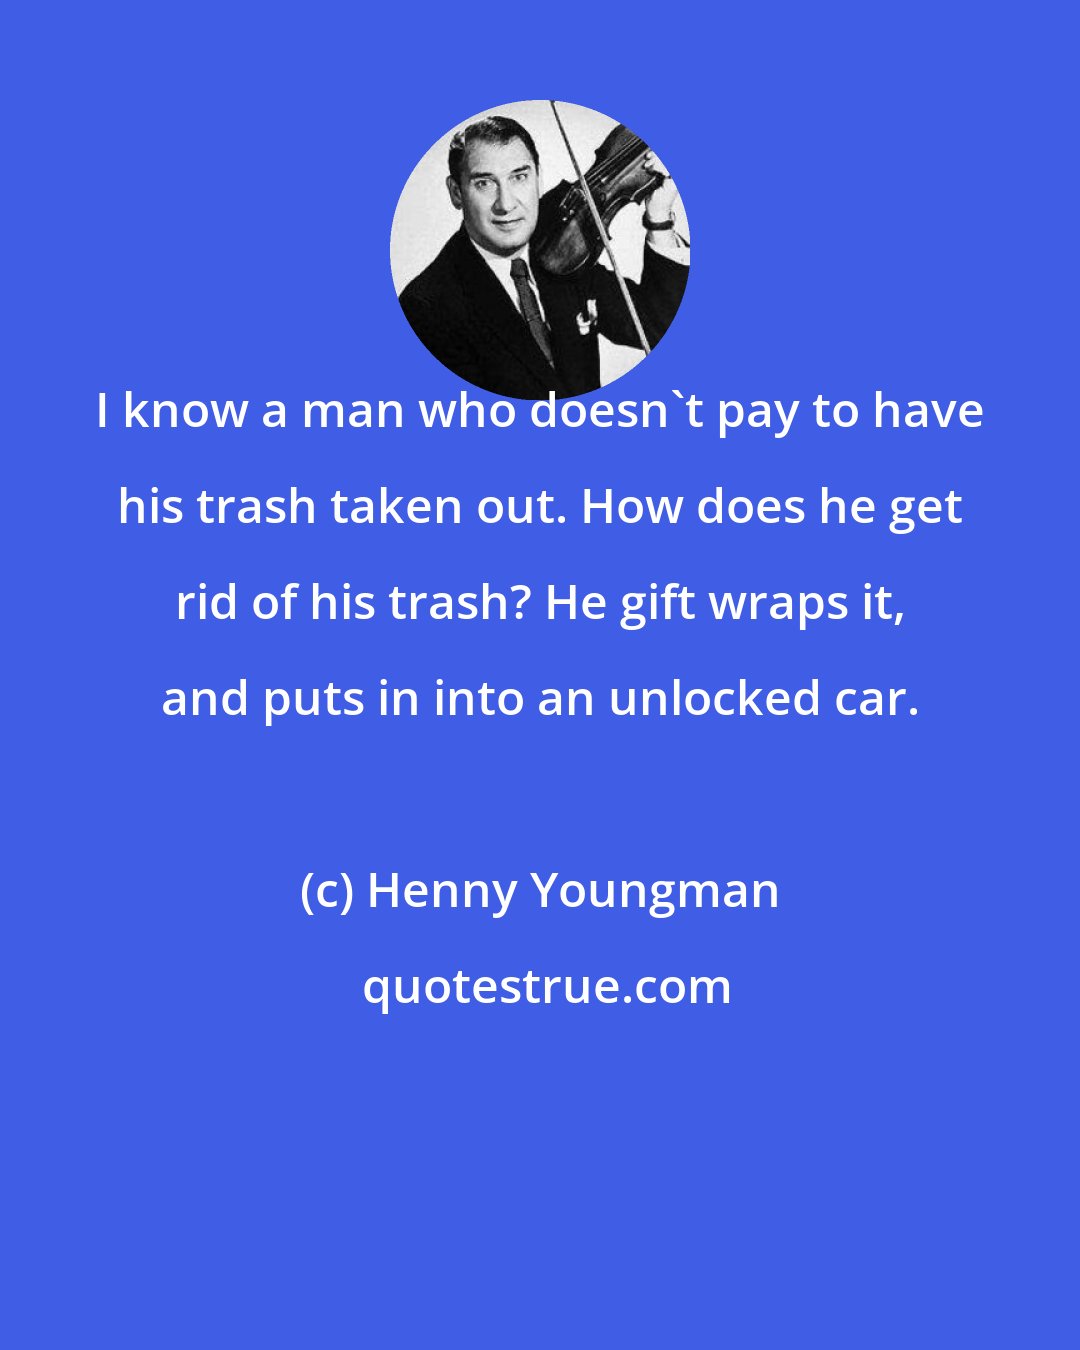 Henny Youngman: I know a man who doesn't pay to have his trash taken out. How does he get rid of his trash? He gift wraps it, and puts in into an unlocked car.